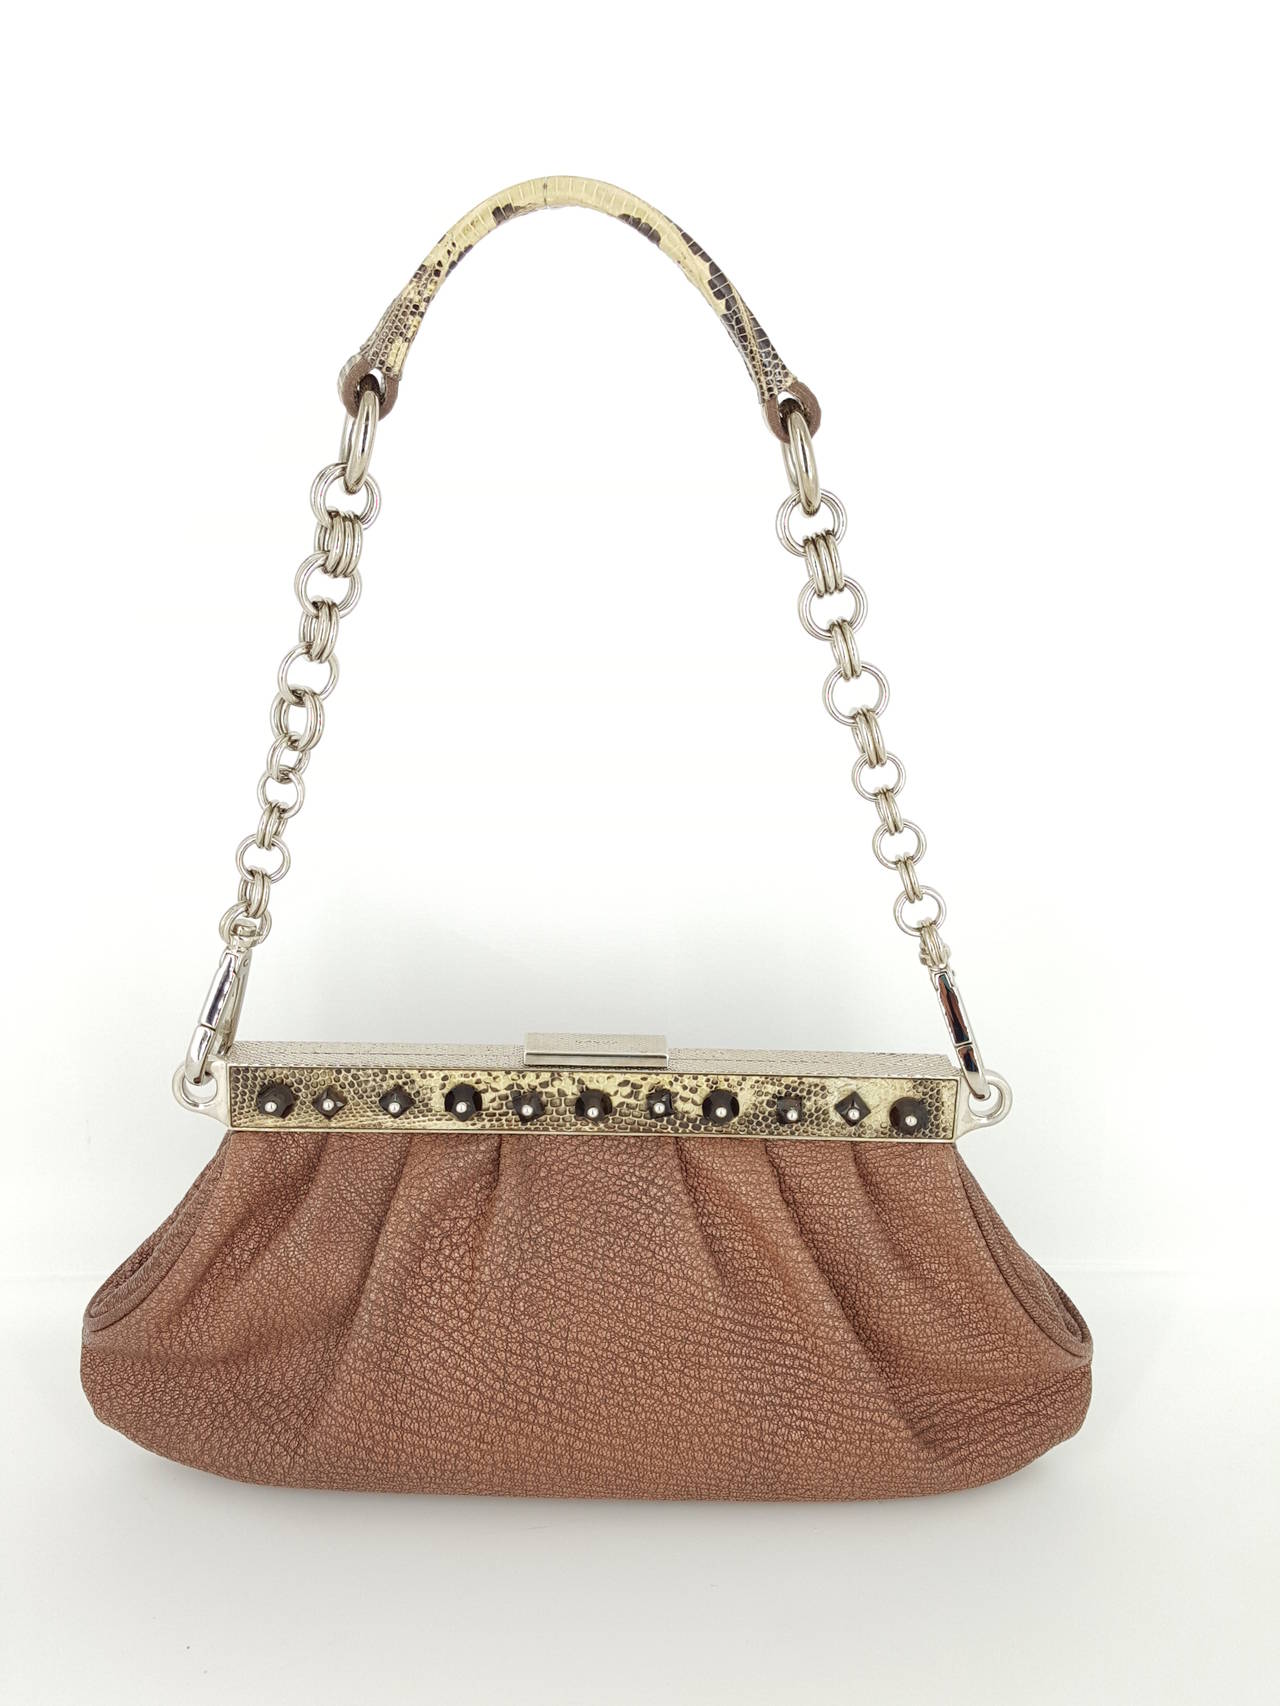 Offered for sale is this stunning Prada Limited Edition Pochette/shoulder bag.
It is brown distressed leather with python trim and strap.  The strap has a wide silver chain and the bag is studded with topaz  crystal studs.  The bag has a rich look